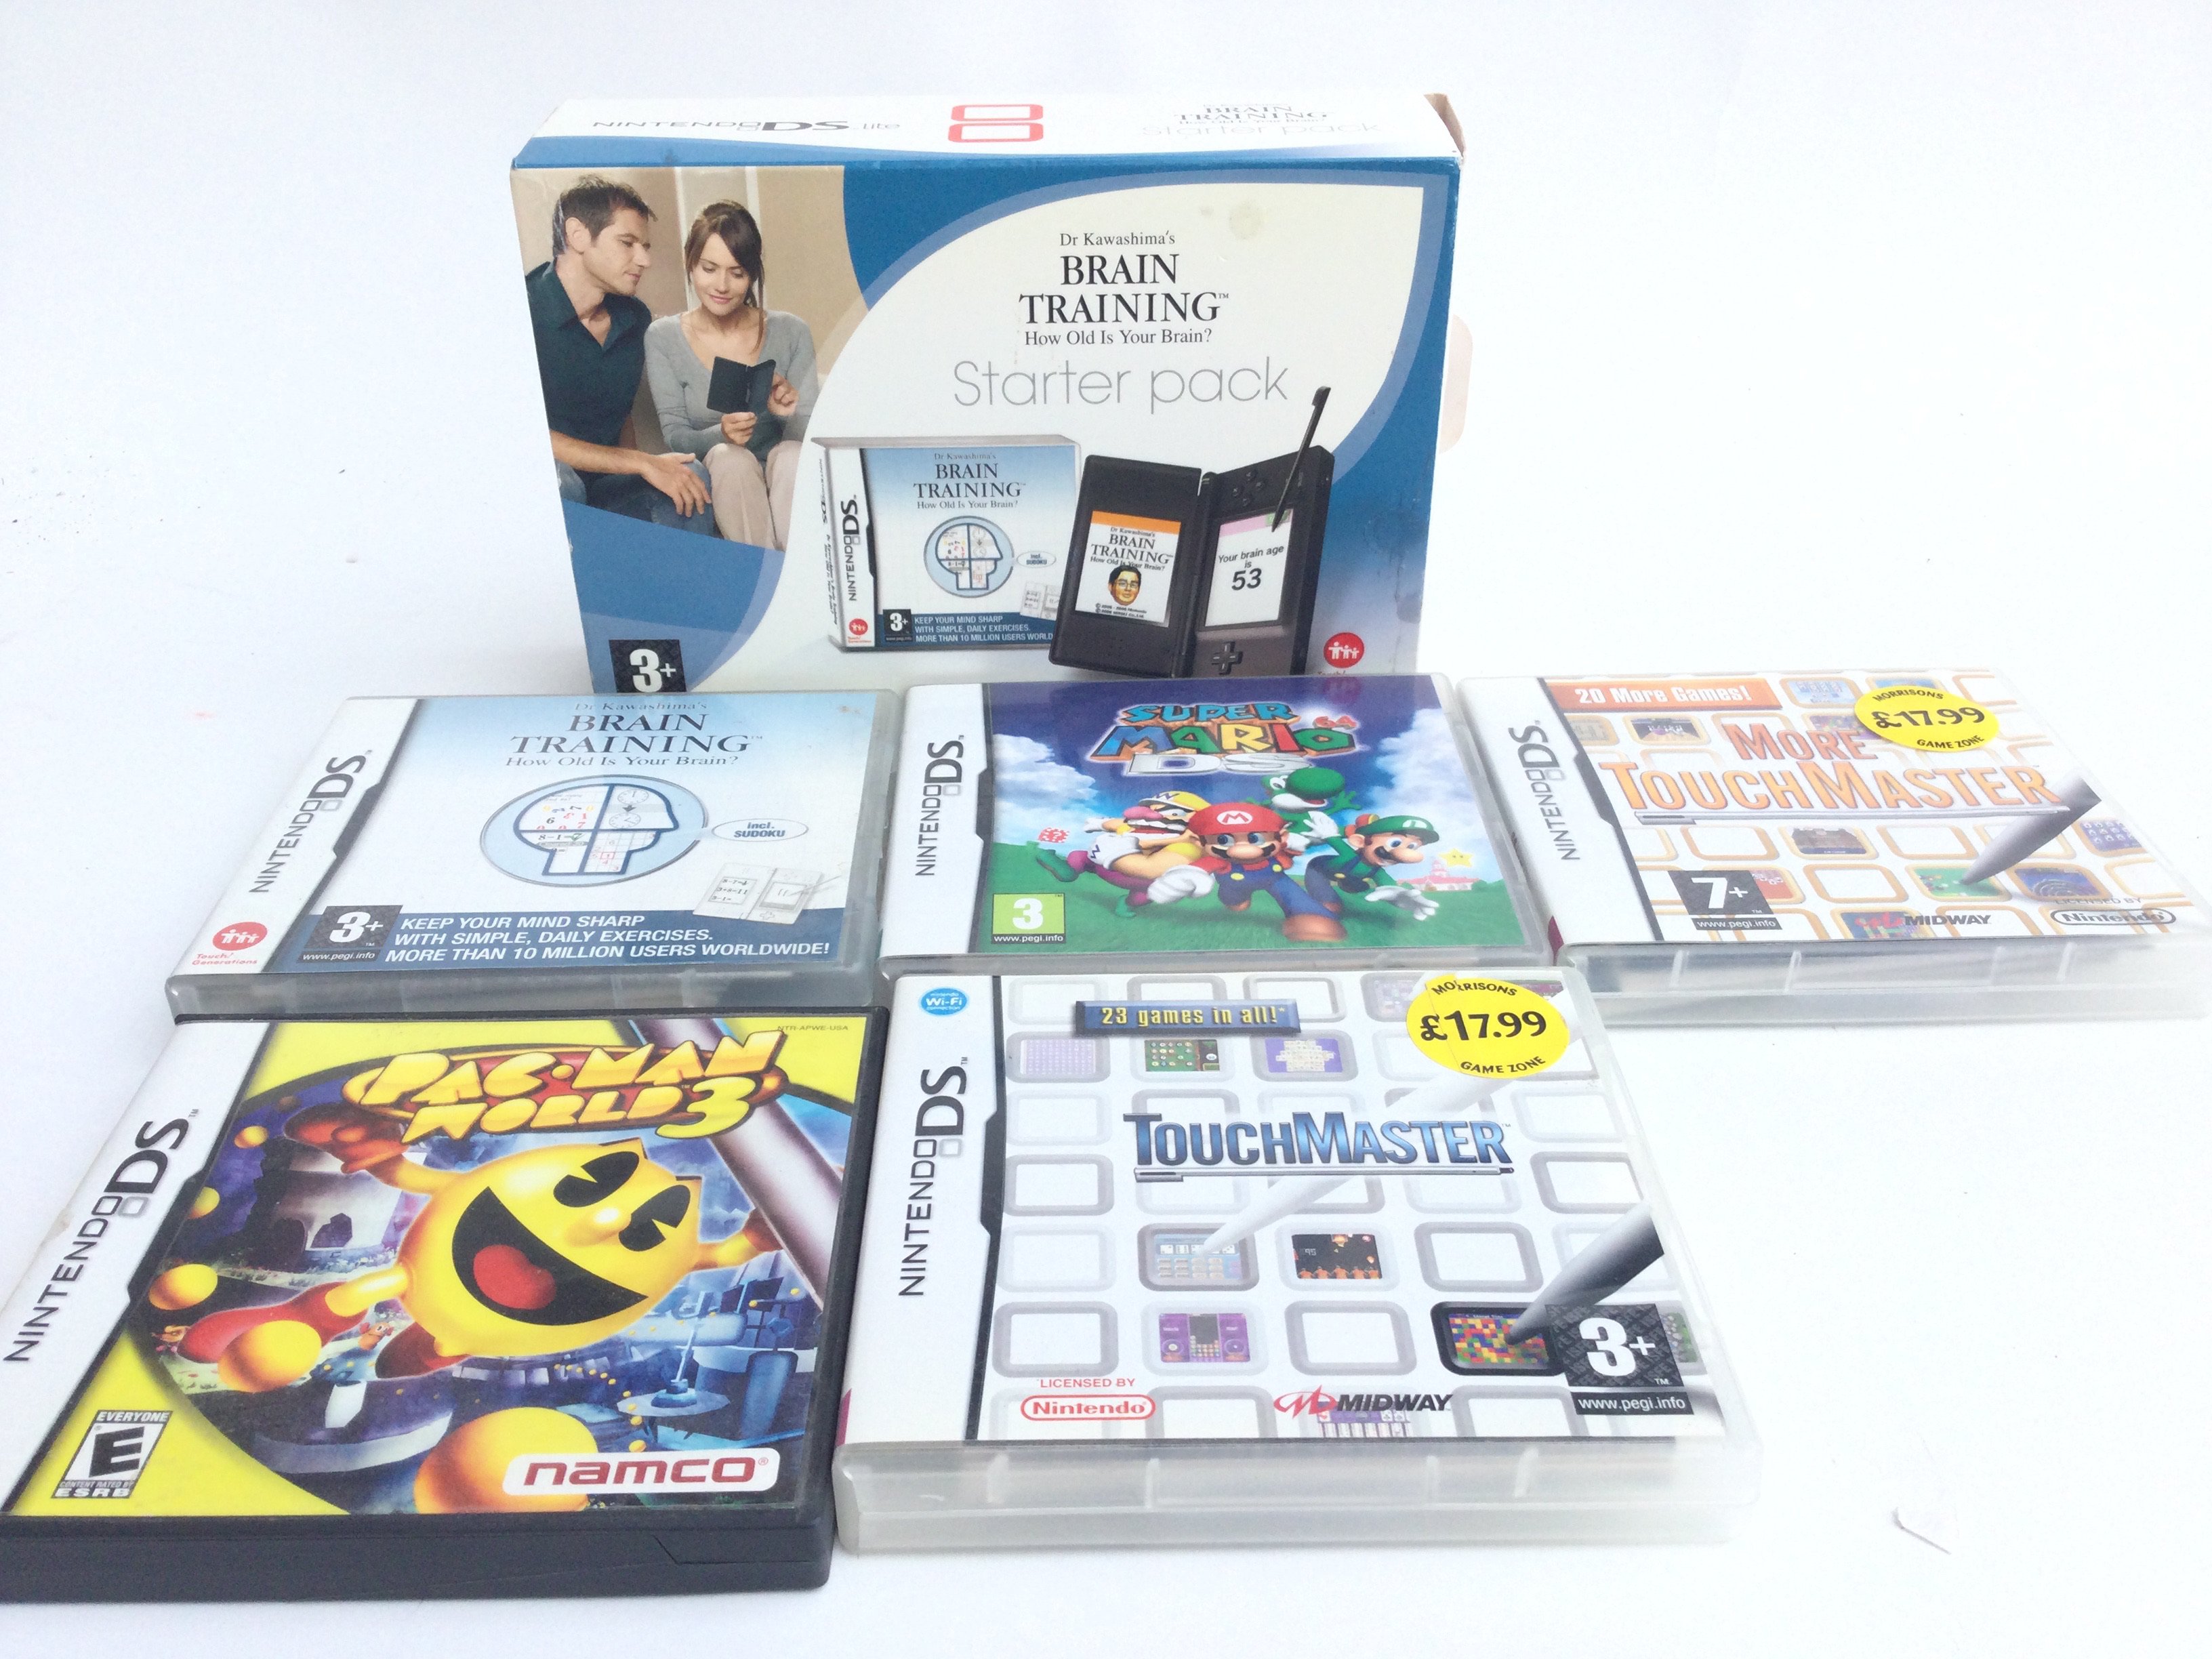 A Boxed Nintendo DS Light and 5 Games.